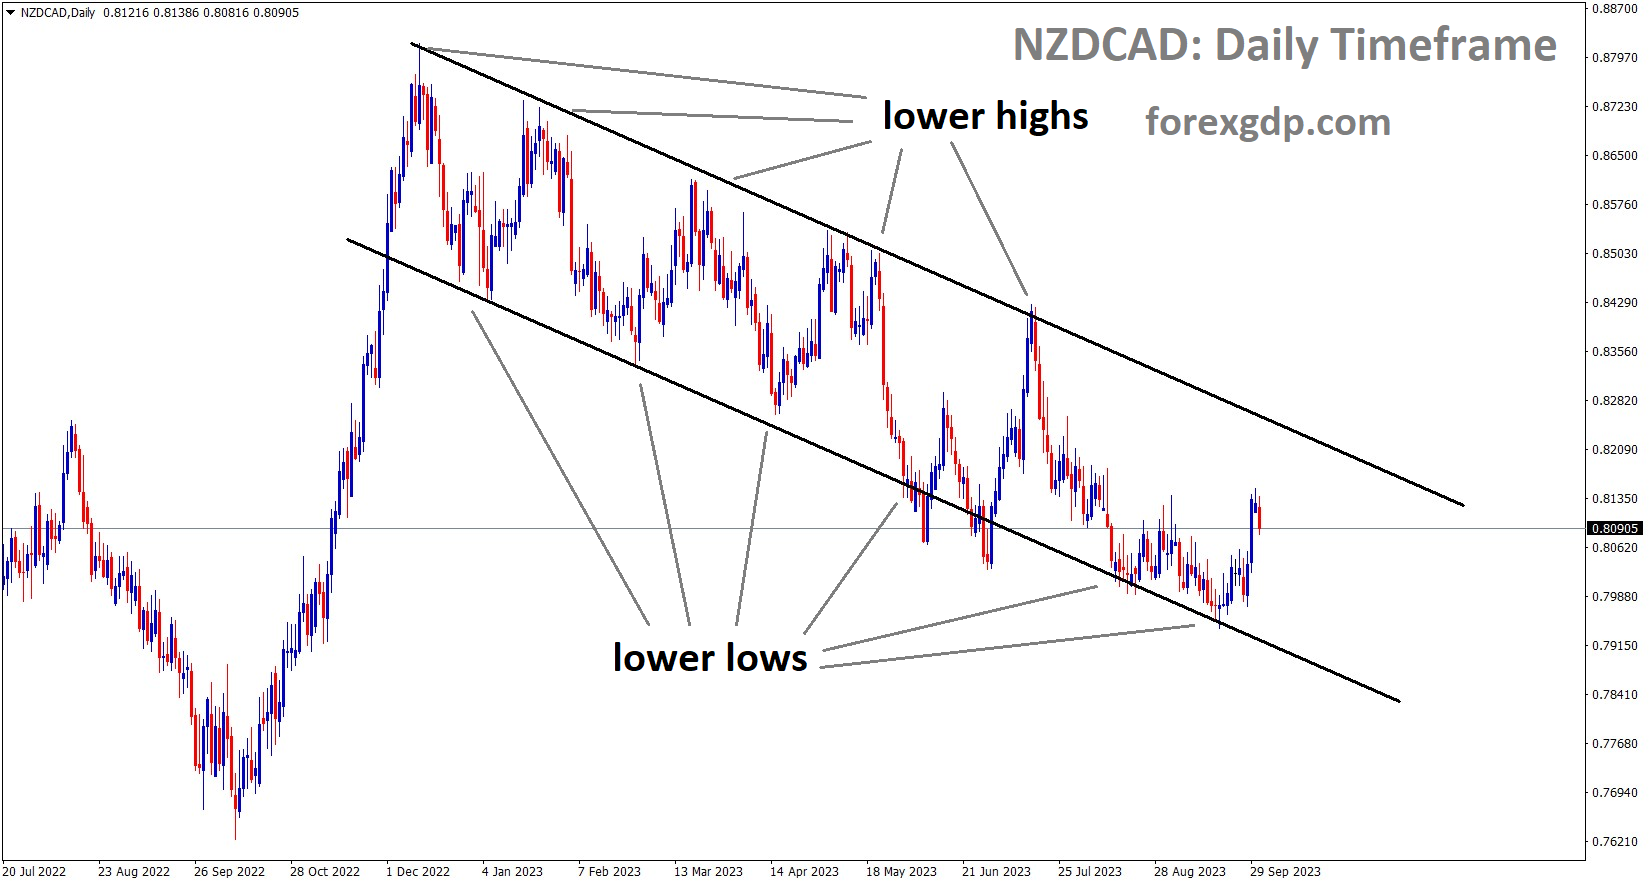 NZDCAD is moving in the Descending channel and the market has rebounded from the lower low area of the channel